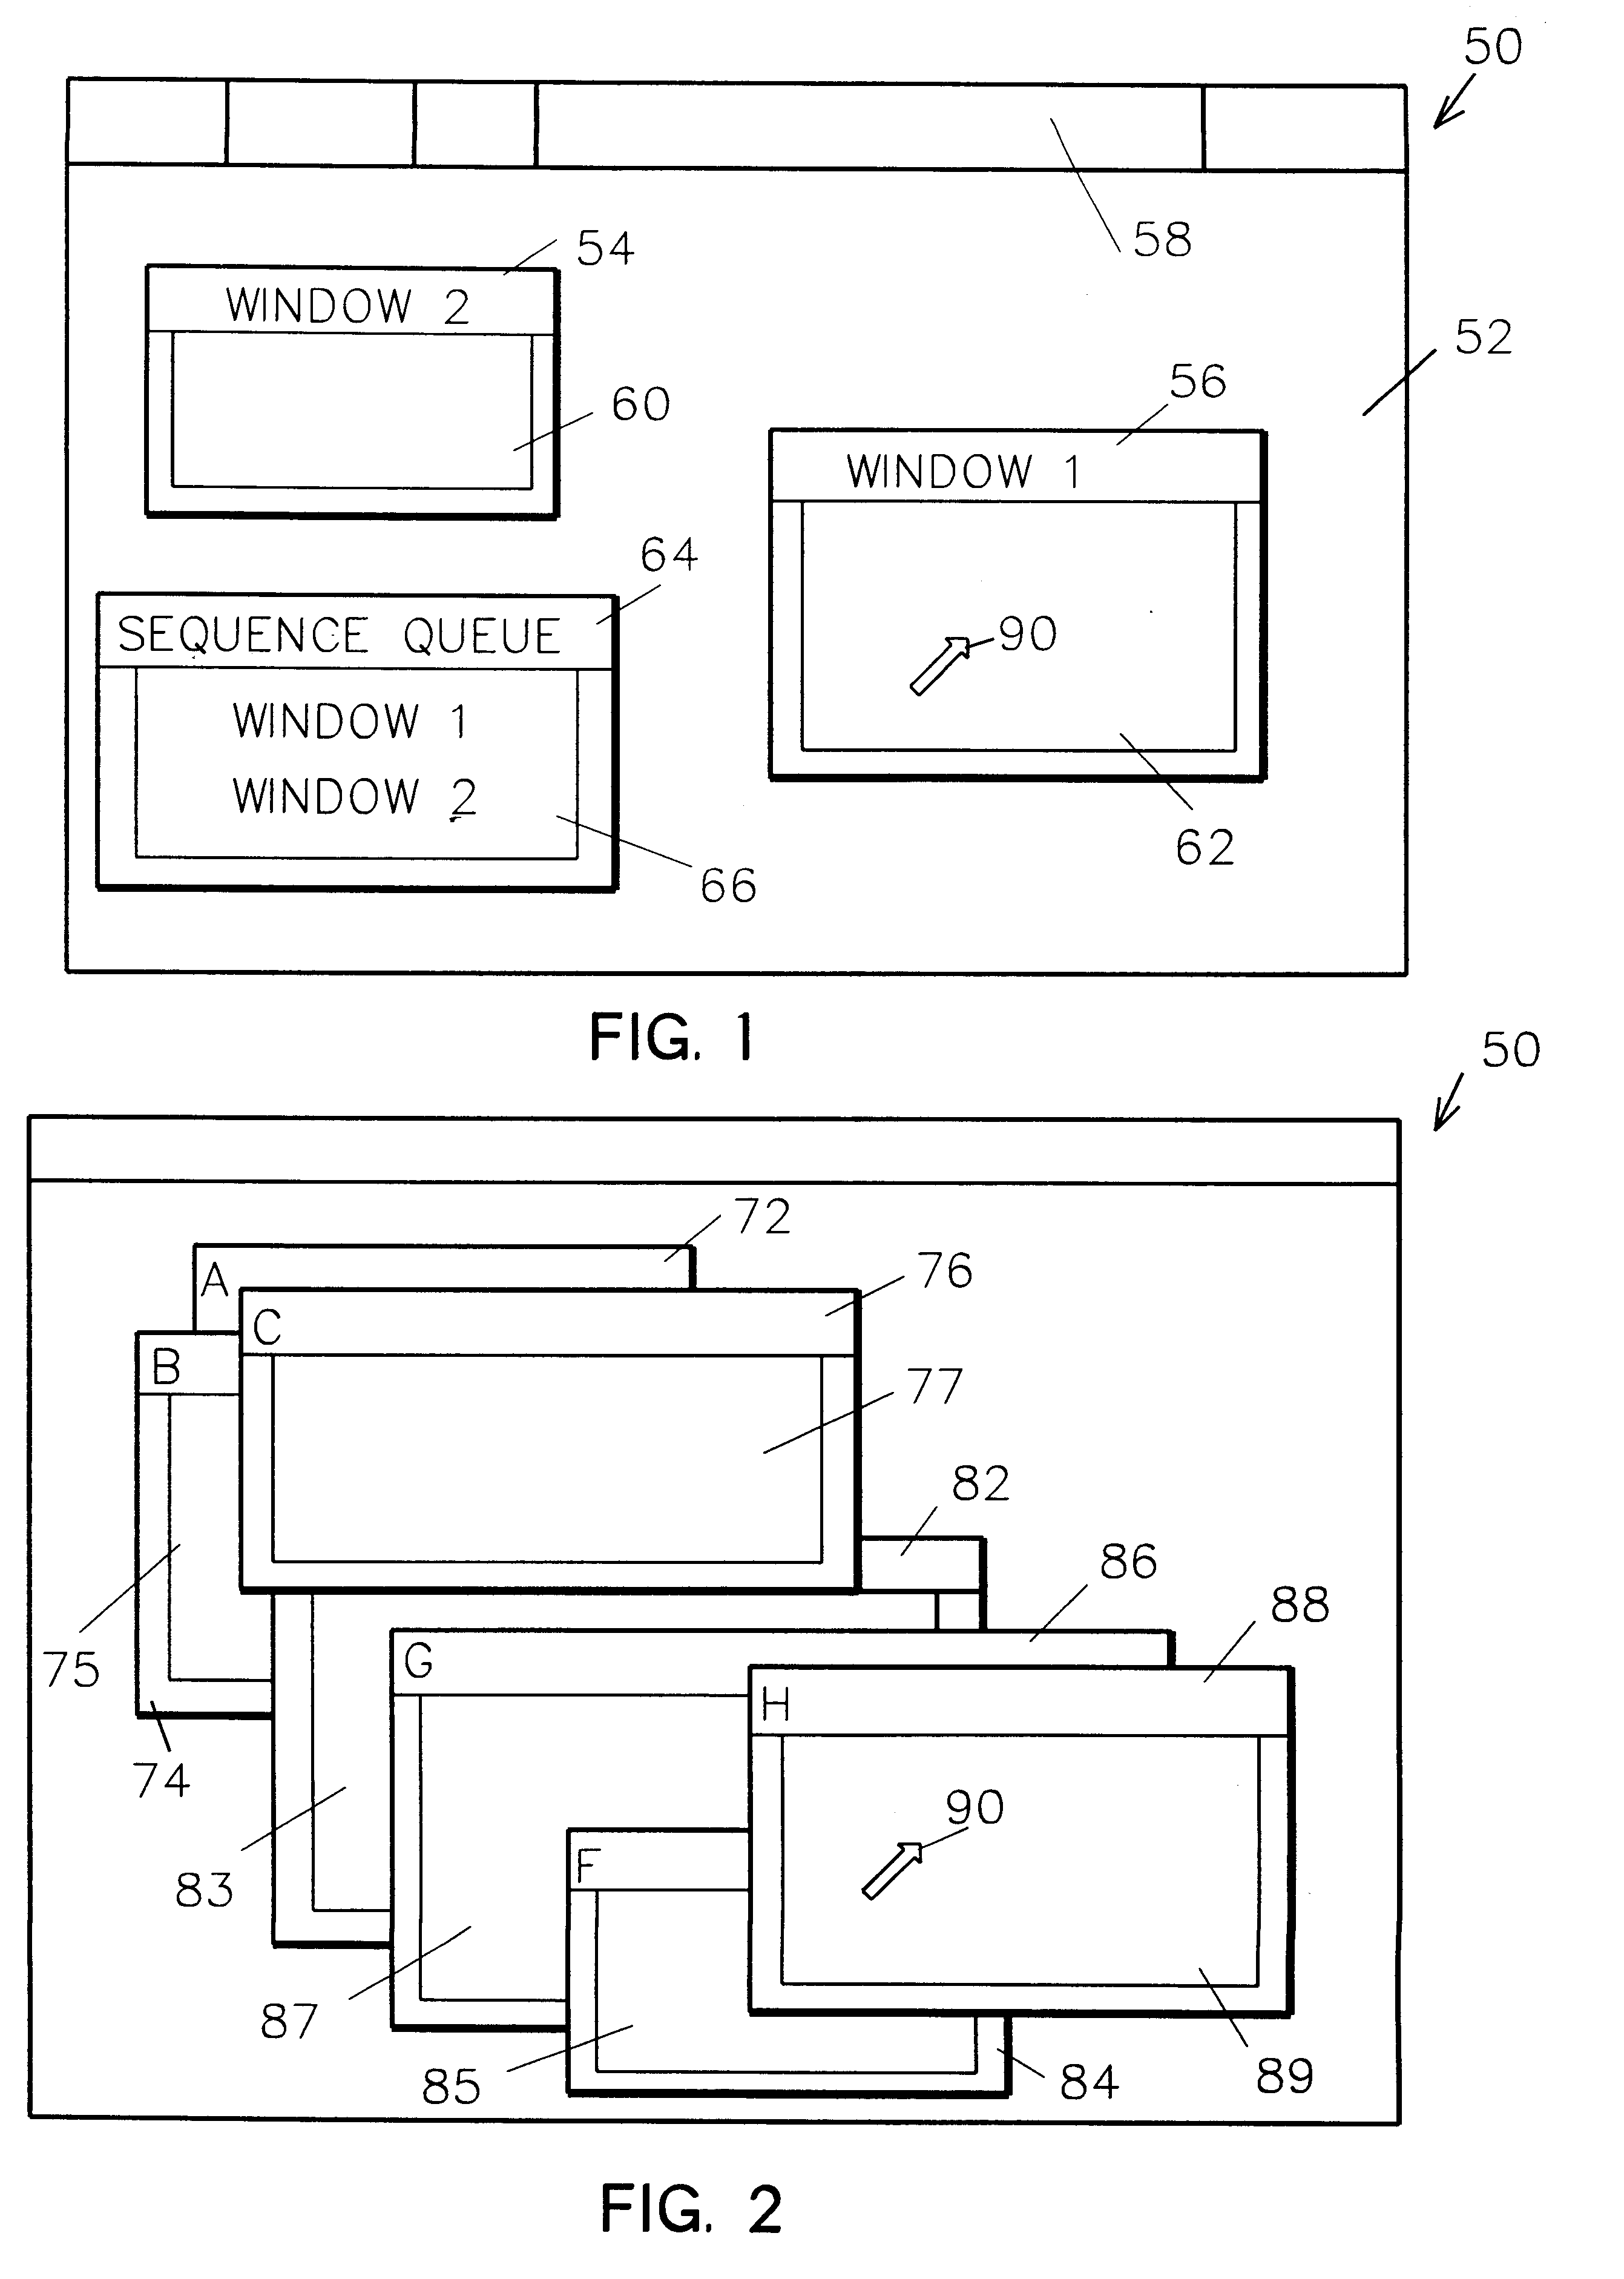 System and method for queues and space activation for toggling windows